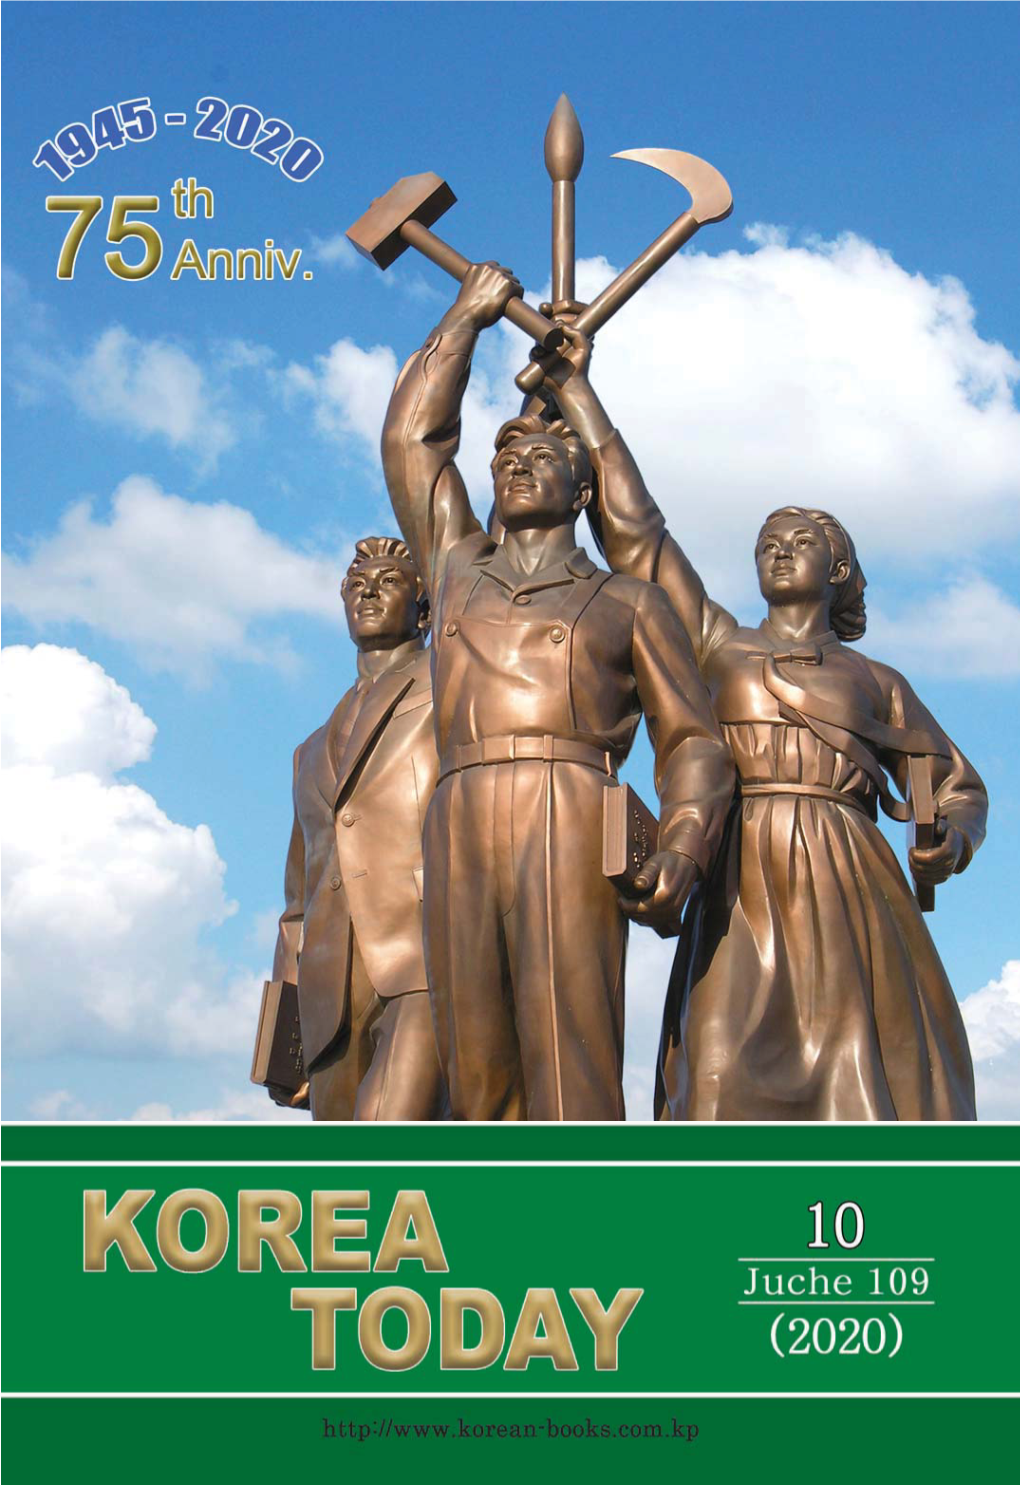 Korea Today Is Available on the Internet Site in English, Russian and Chinese